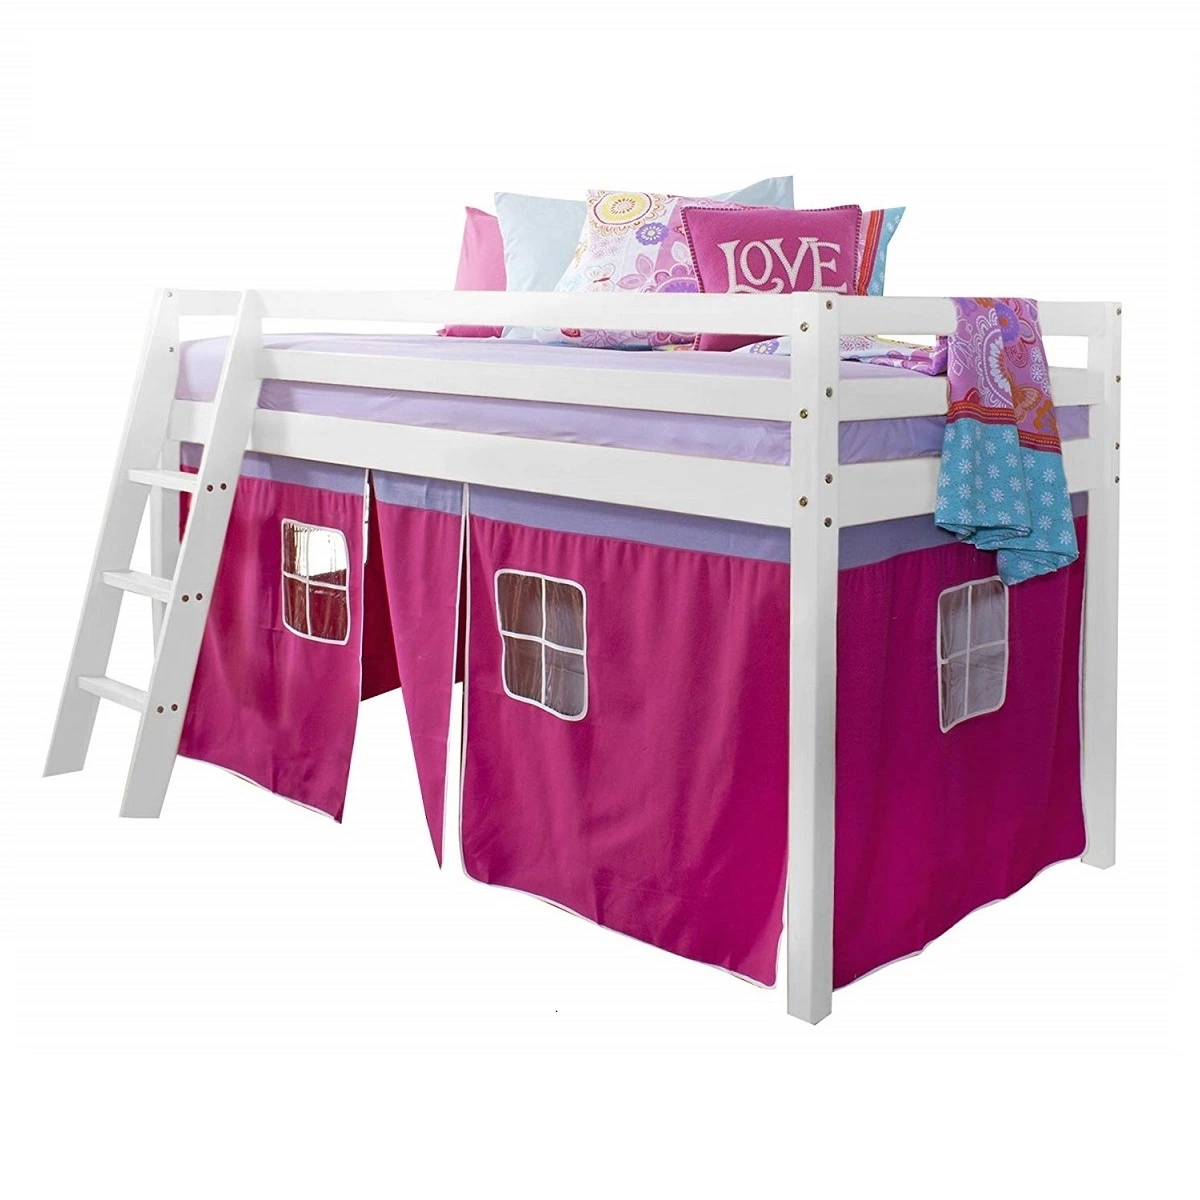 MID-Sleeper Cabin Bunk Bed Loft Bed with Slide and Tent for Children